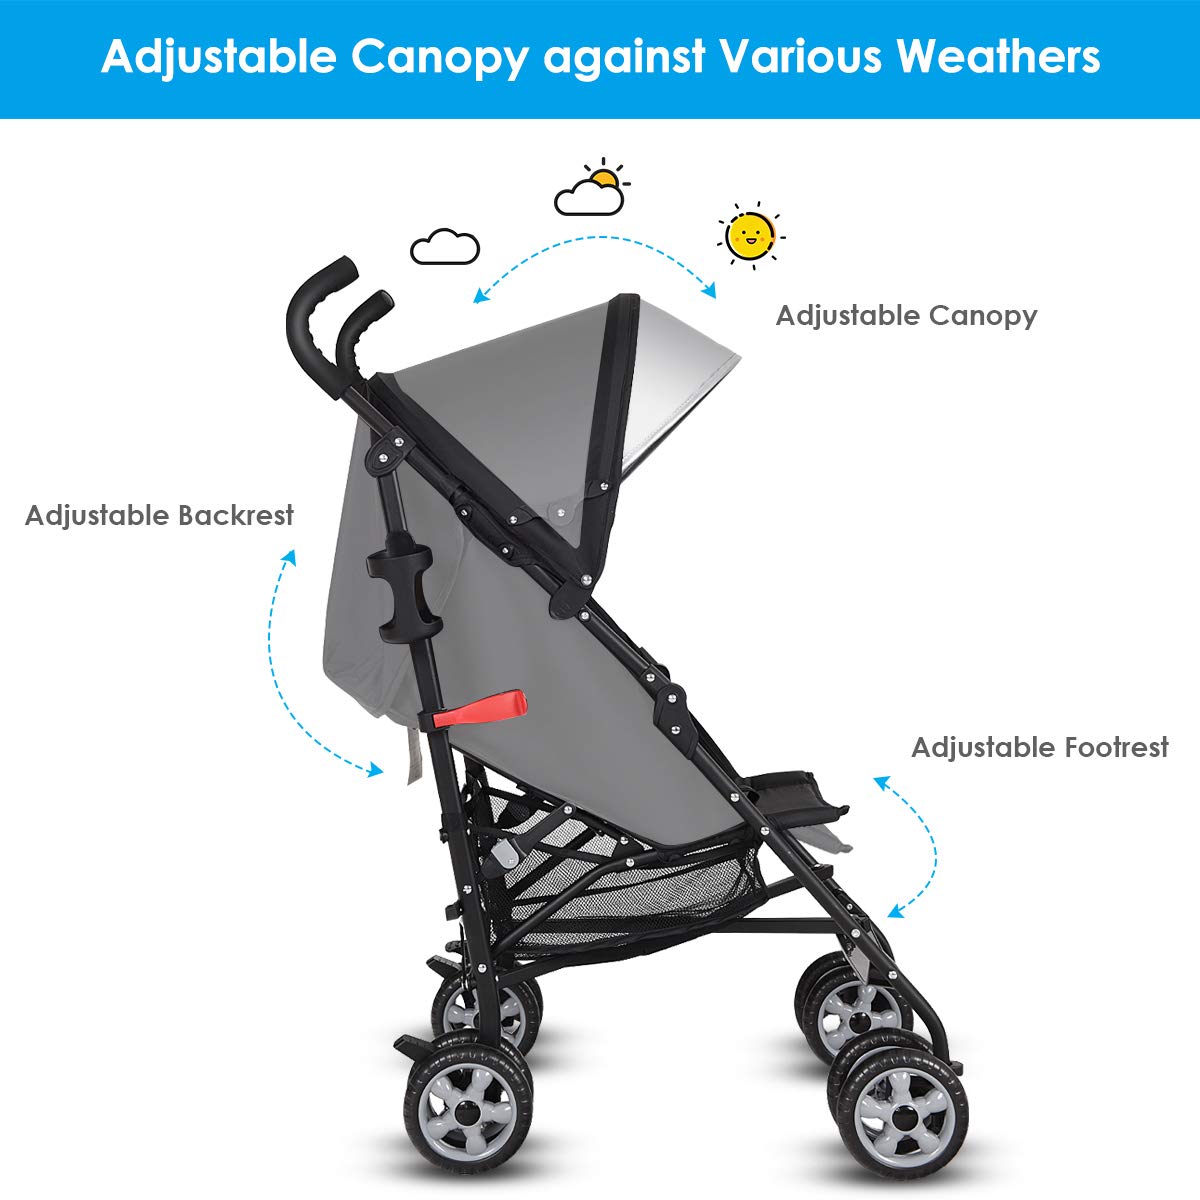 Adjustable Backrest & Canopy: Comes with 3-positions adjustable backrest, this compact stroller for toddlers enables baby to freely lie, sit, or sleep and the 5-point safety harness will firmly secure baby when moving. And the adjustable canopy in 3-section can well protect your baby from ultraviolet radiation and accidental rain.